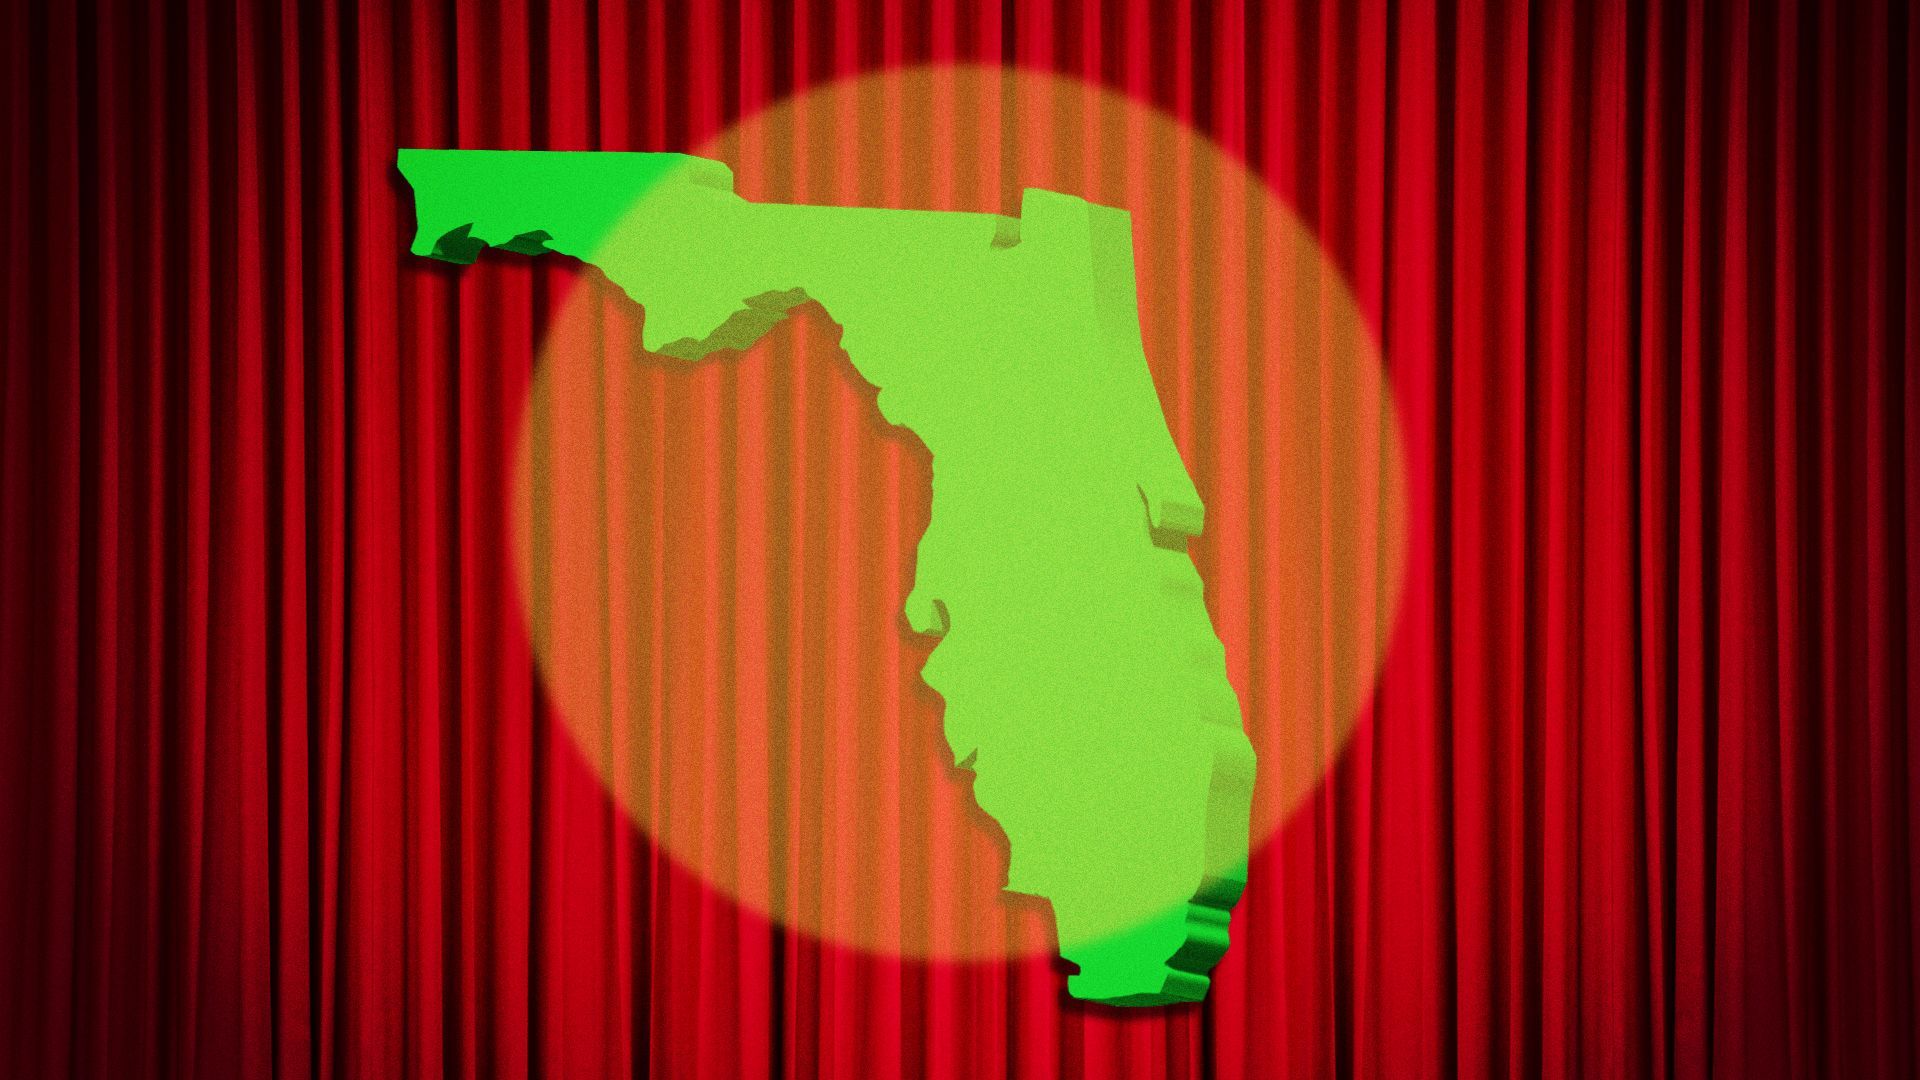 Florida Rising: We Are the New Majority